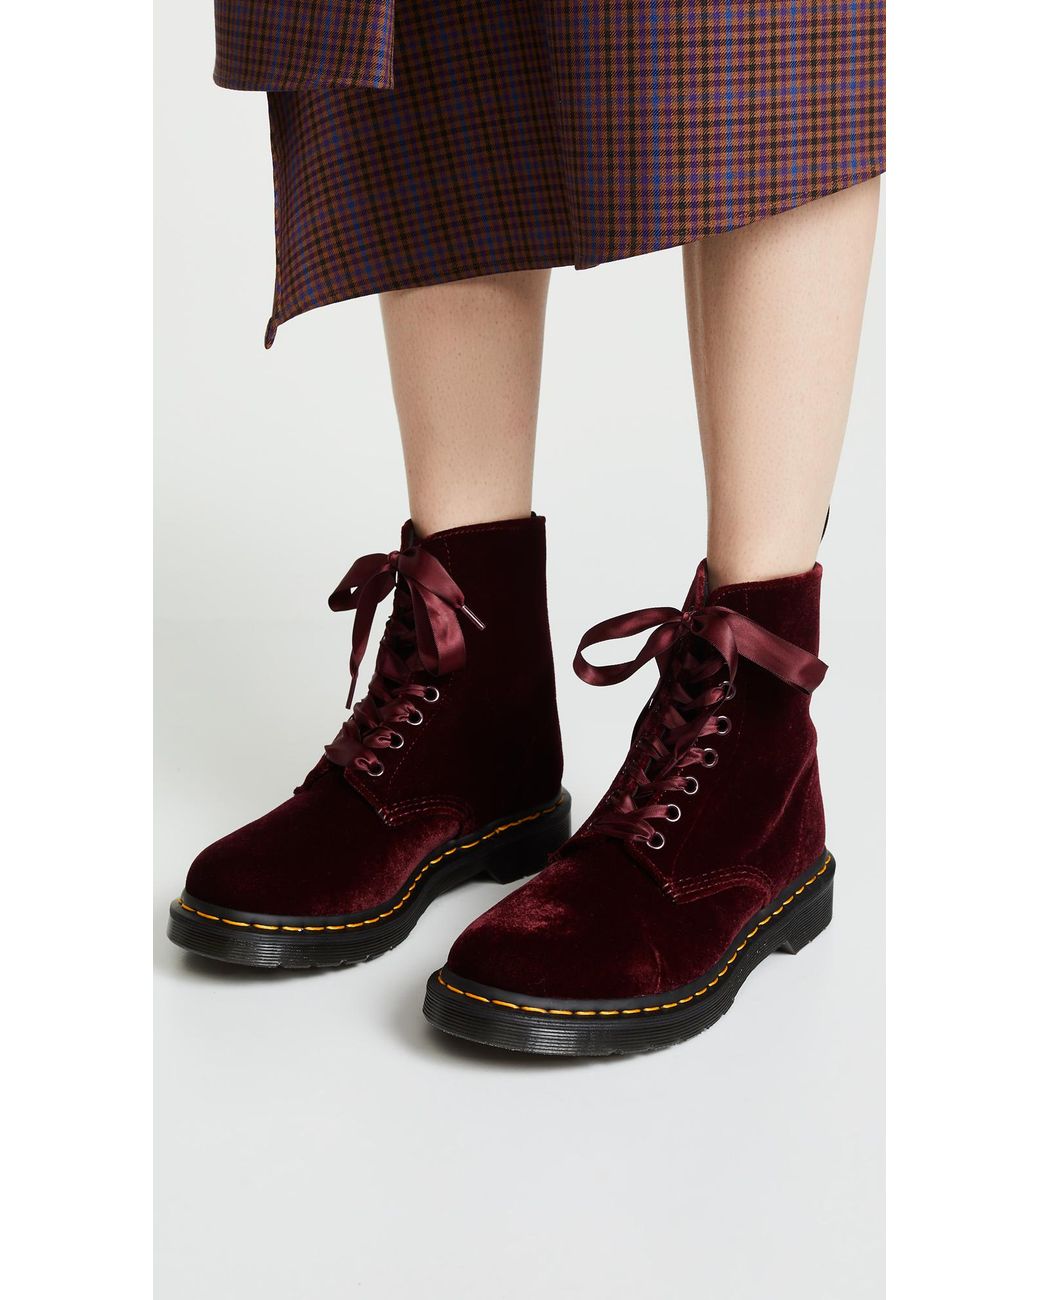 Dr. Martens 1460 Pascal Velvet 8 Eye Boots in Cherry Red (Red) | Lyst